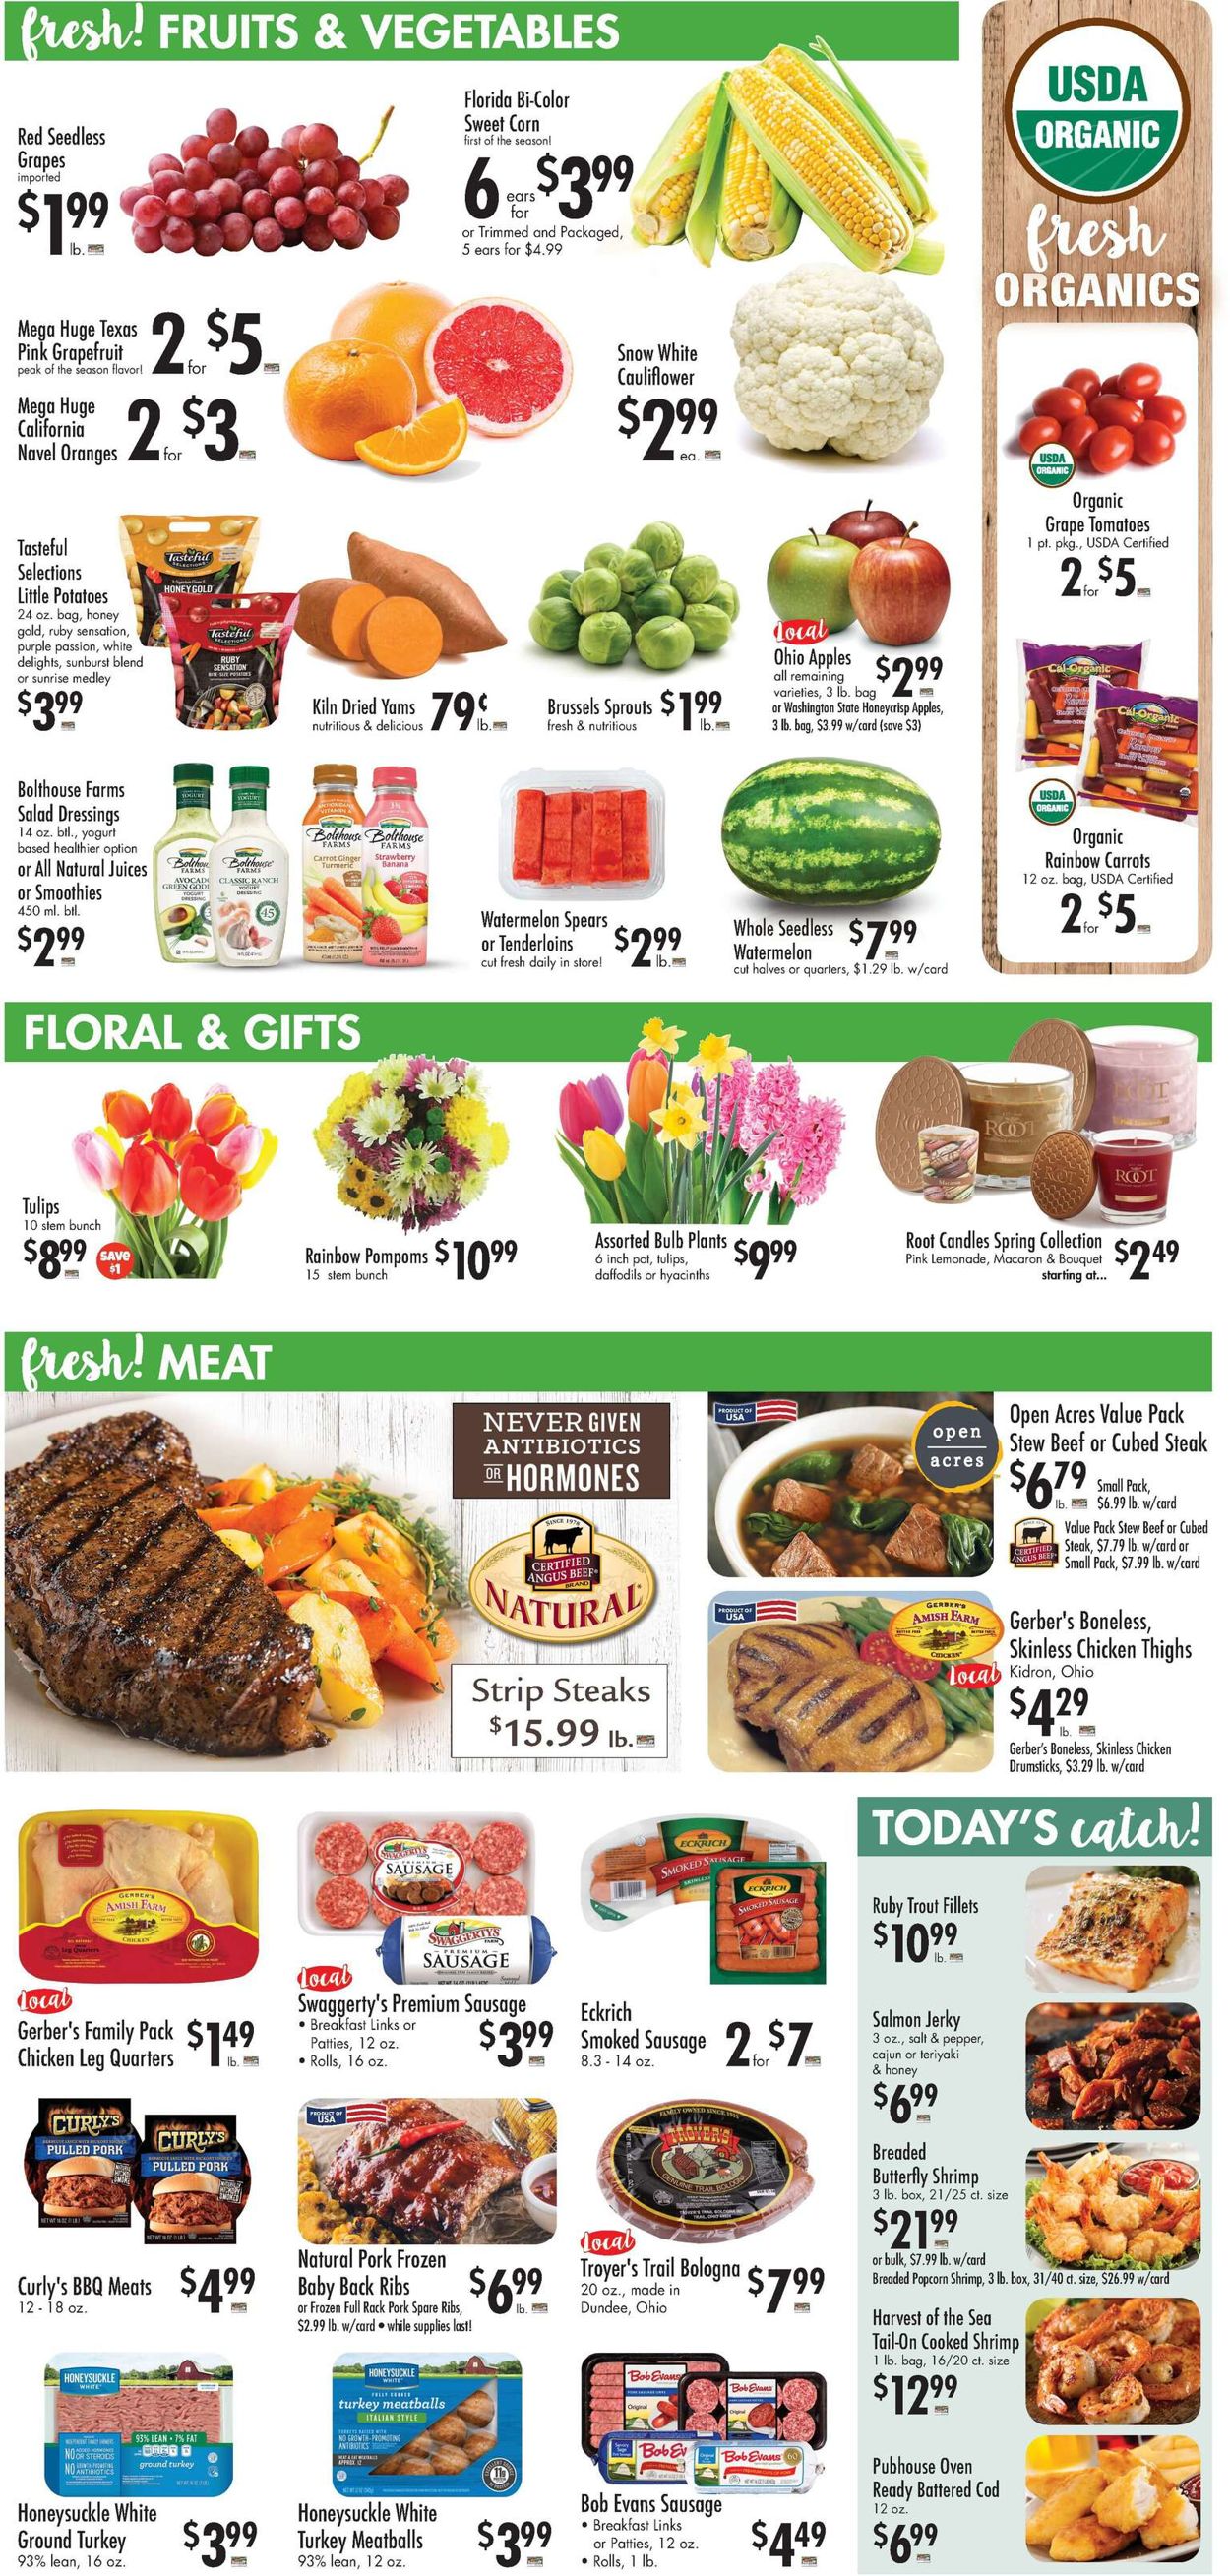 Catalogue Buehler's Fresh Foods from 03/16/2022